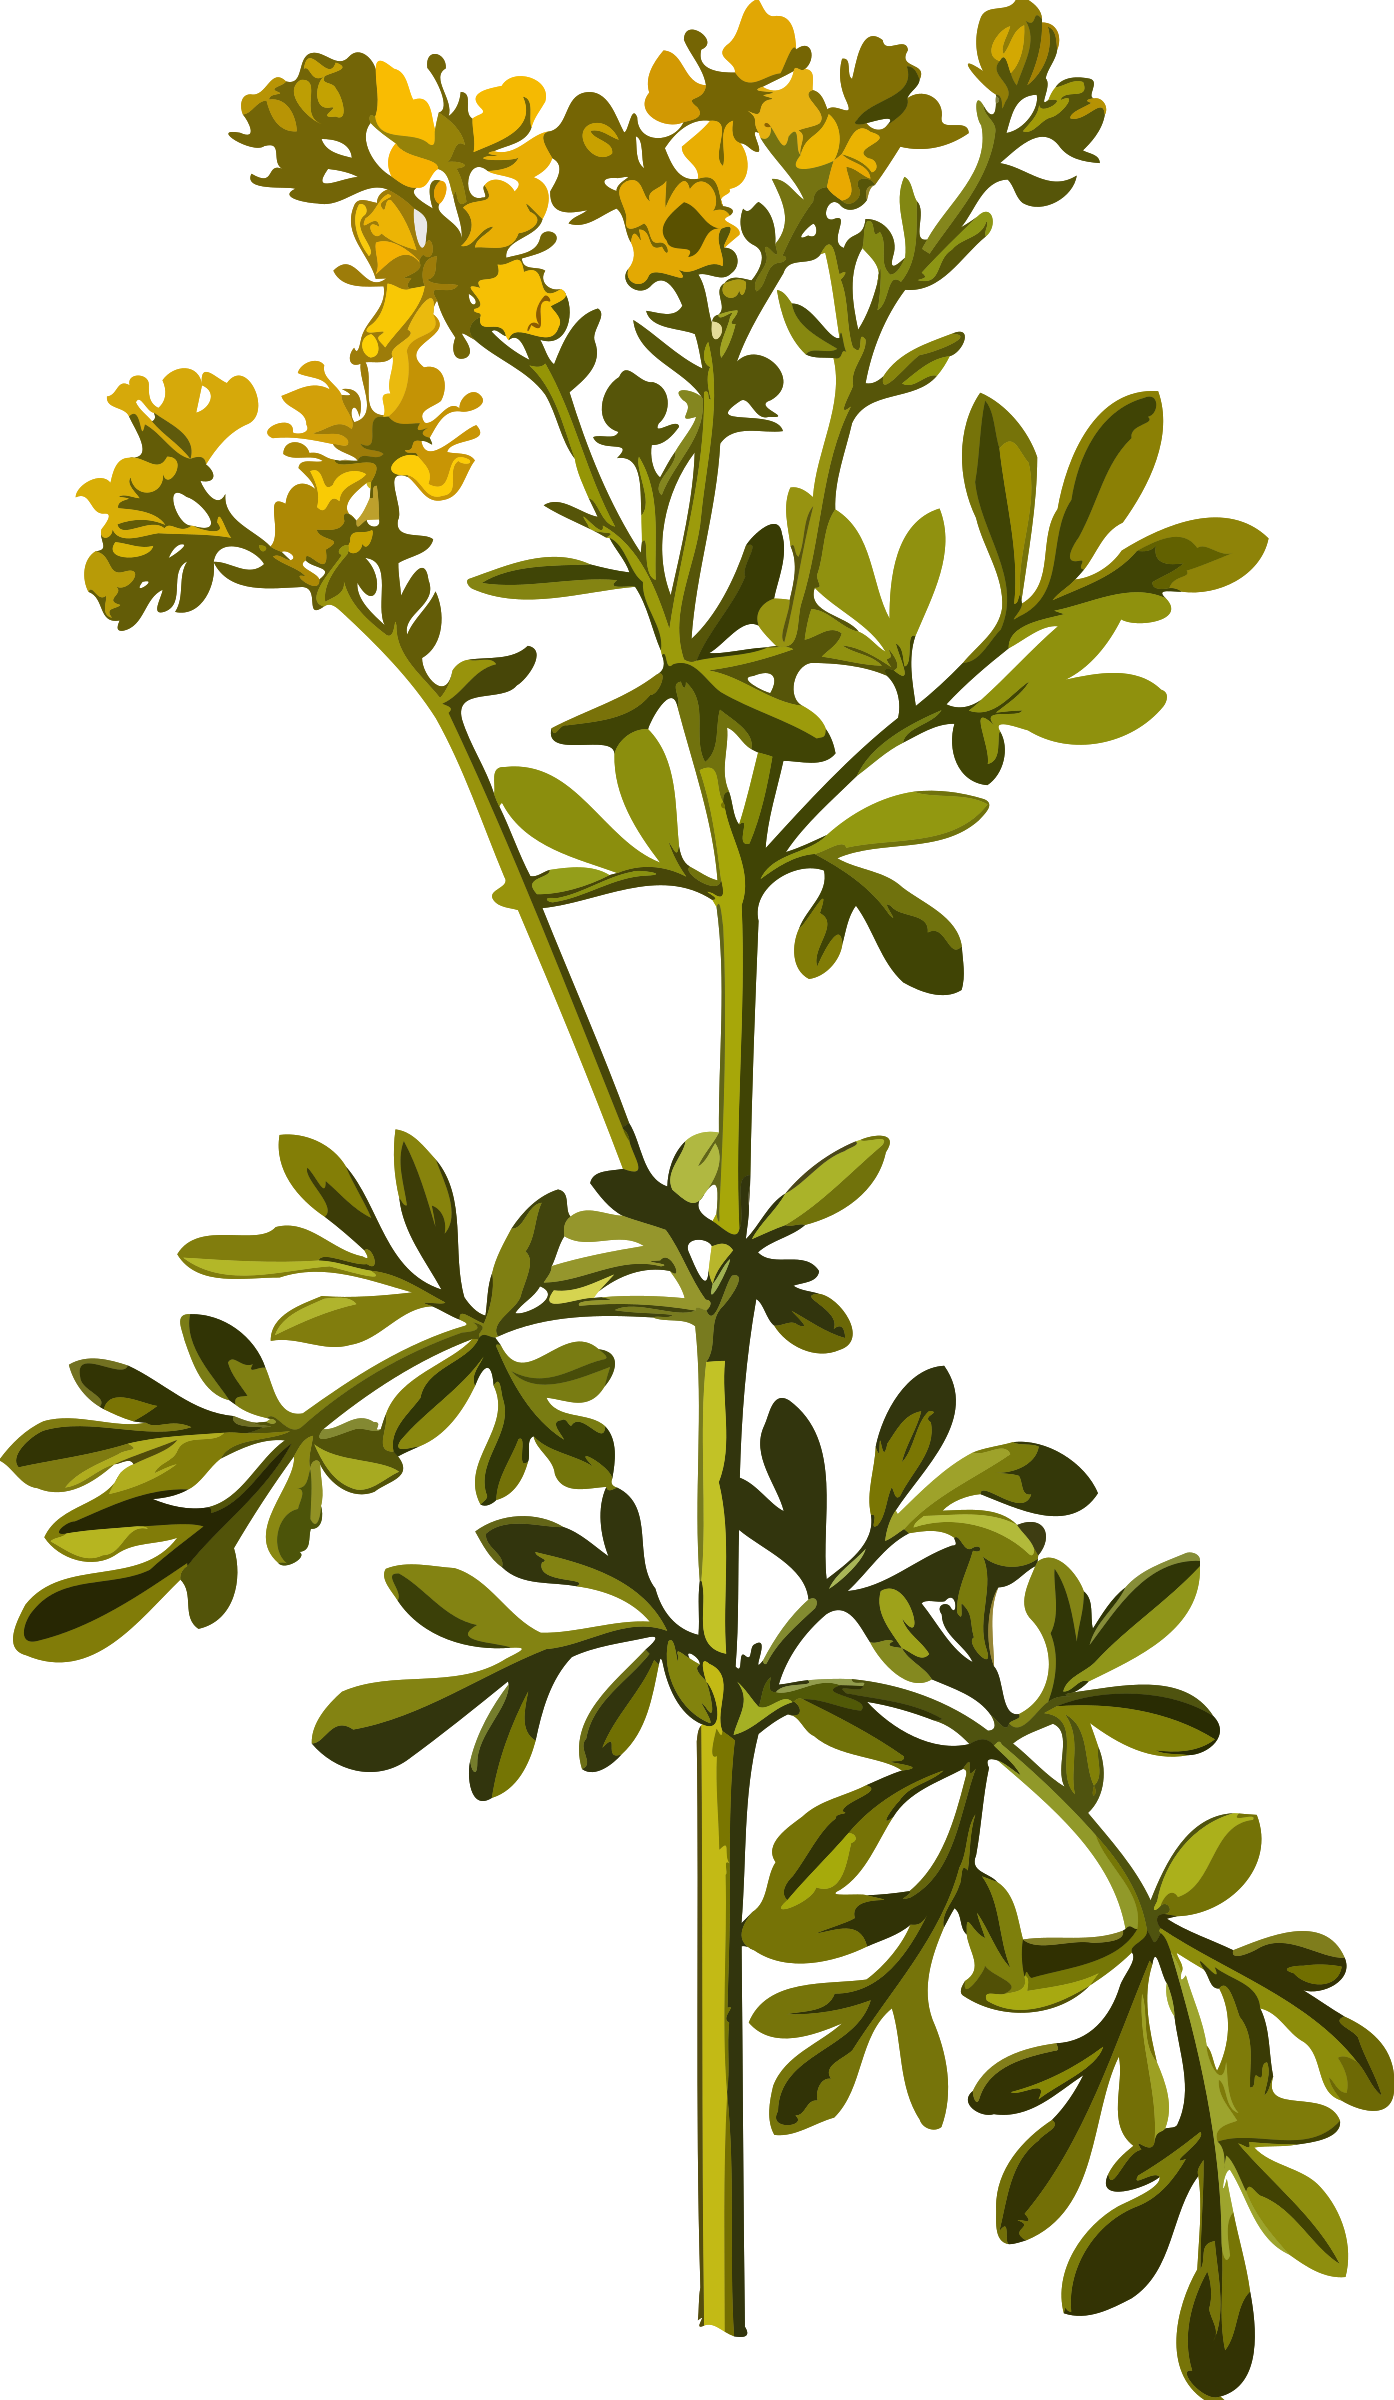 Common Rue By @firkin, From A Drawing In 'medizinal-pflanzen', - Rue Plant Illustration (1394x2400)